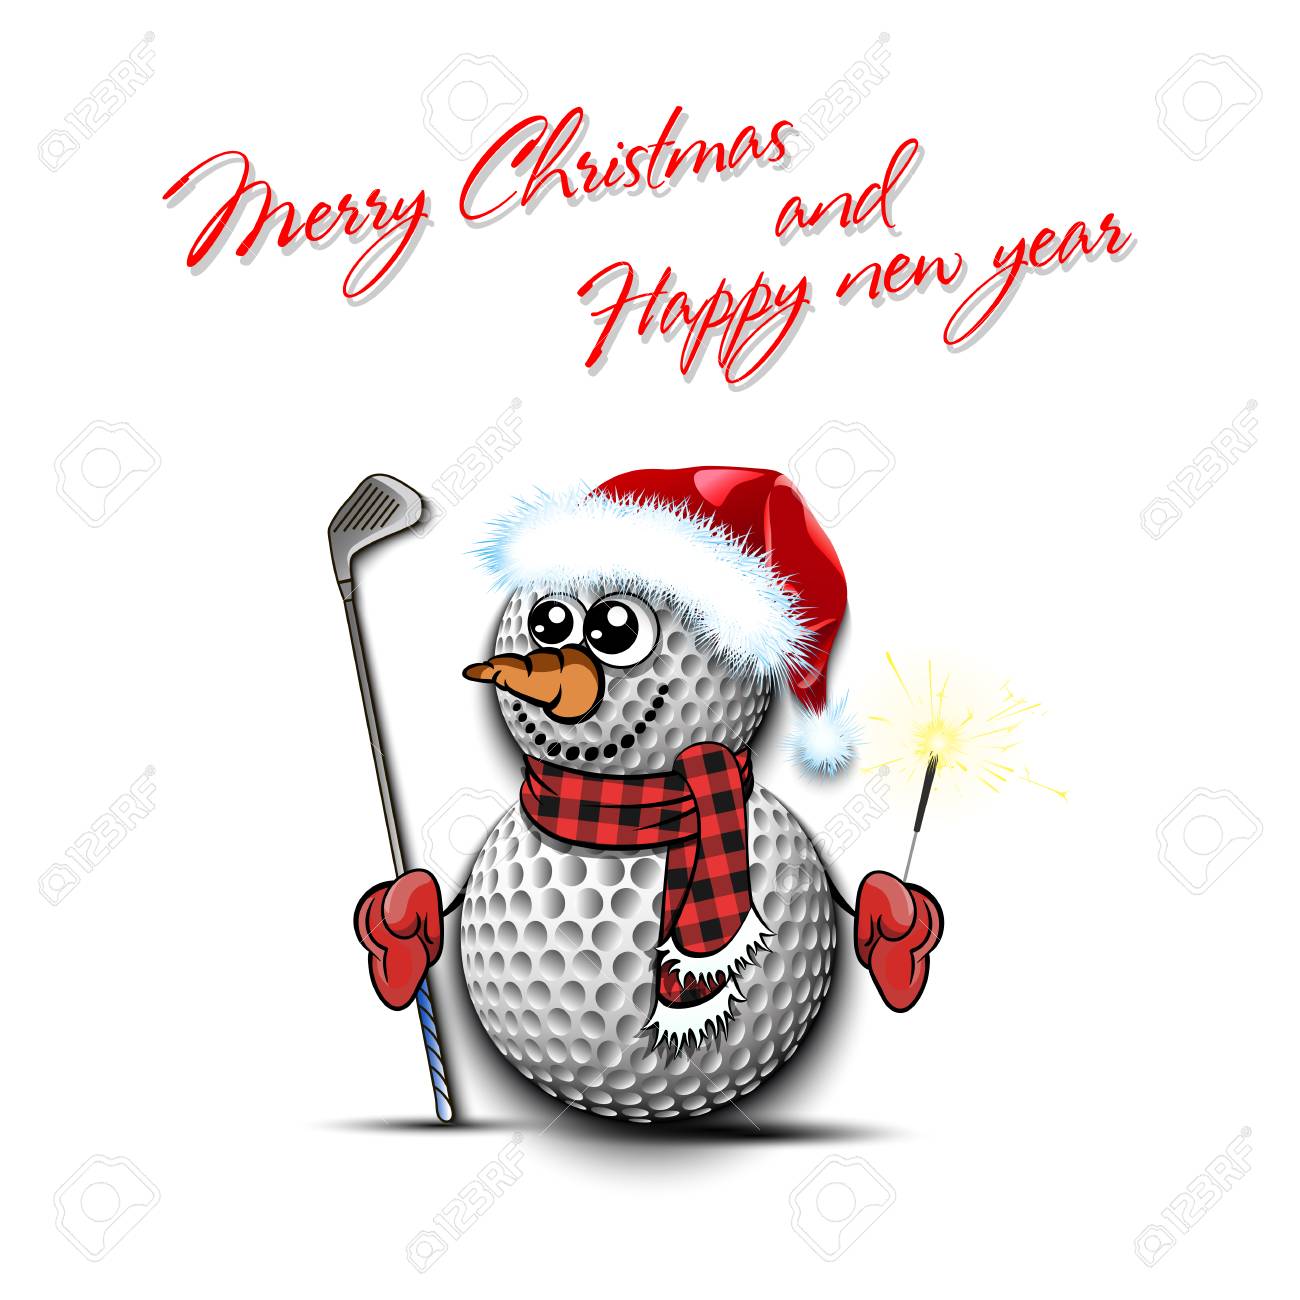 126836883-merry-christmas-and-happy-new-year-snowman-from-golf-balls-on-an-isolated-background-pattern-for-ban.jpg